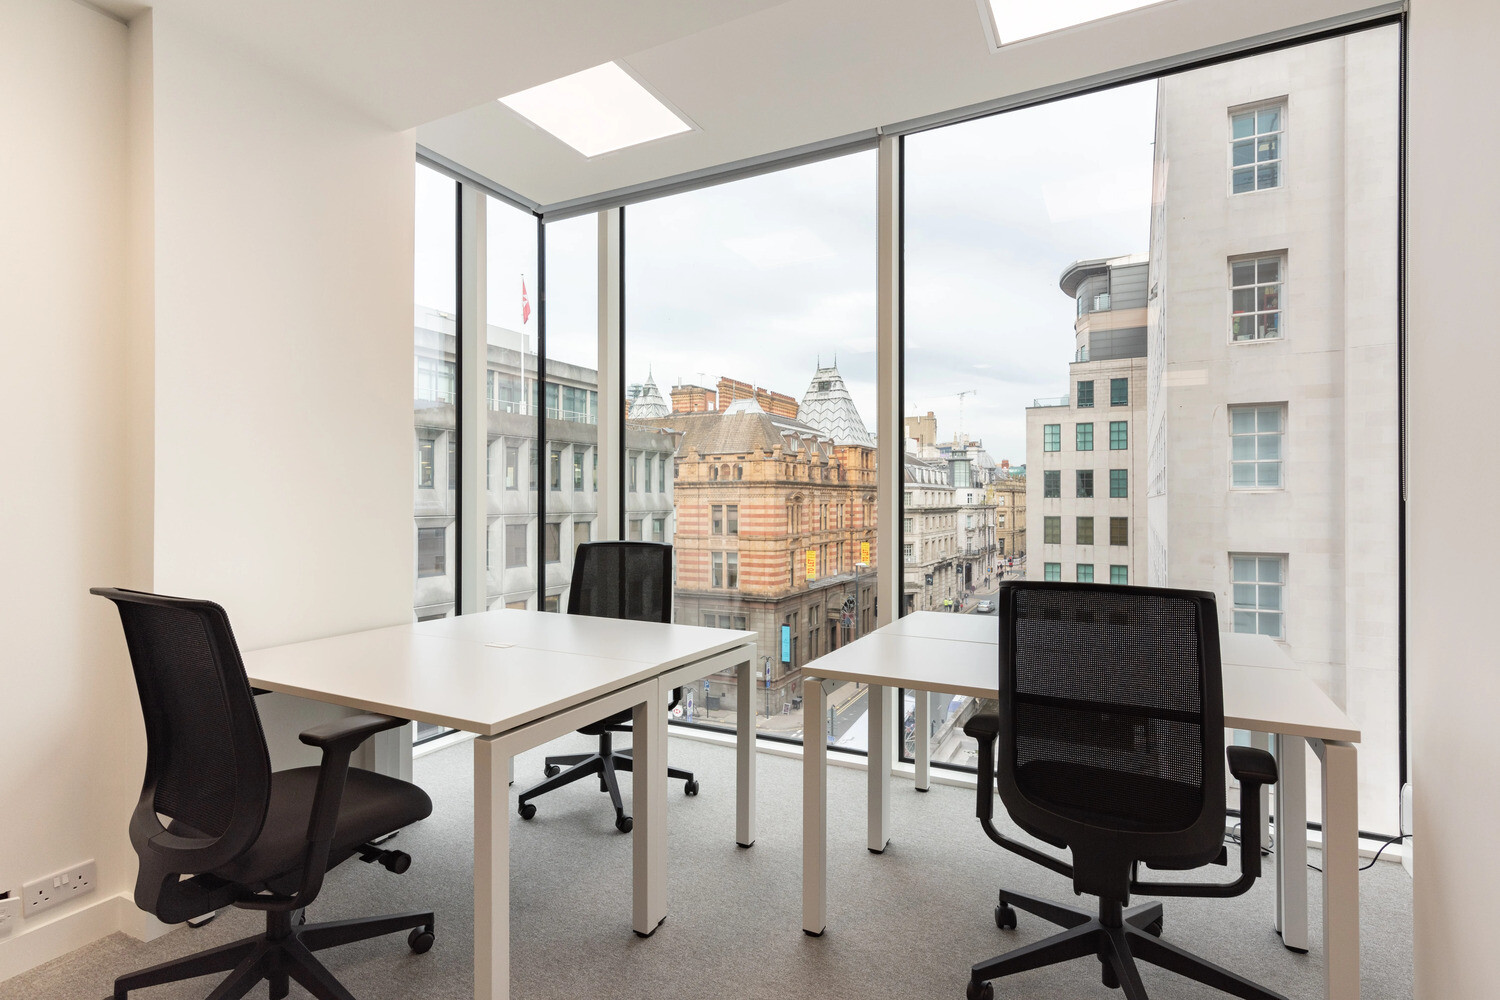 Office space at Park Row